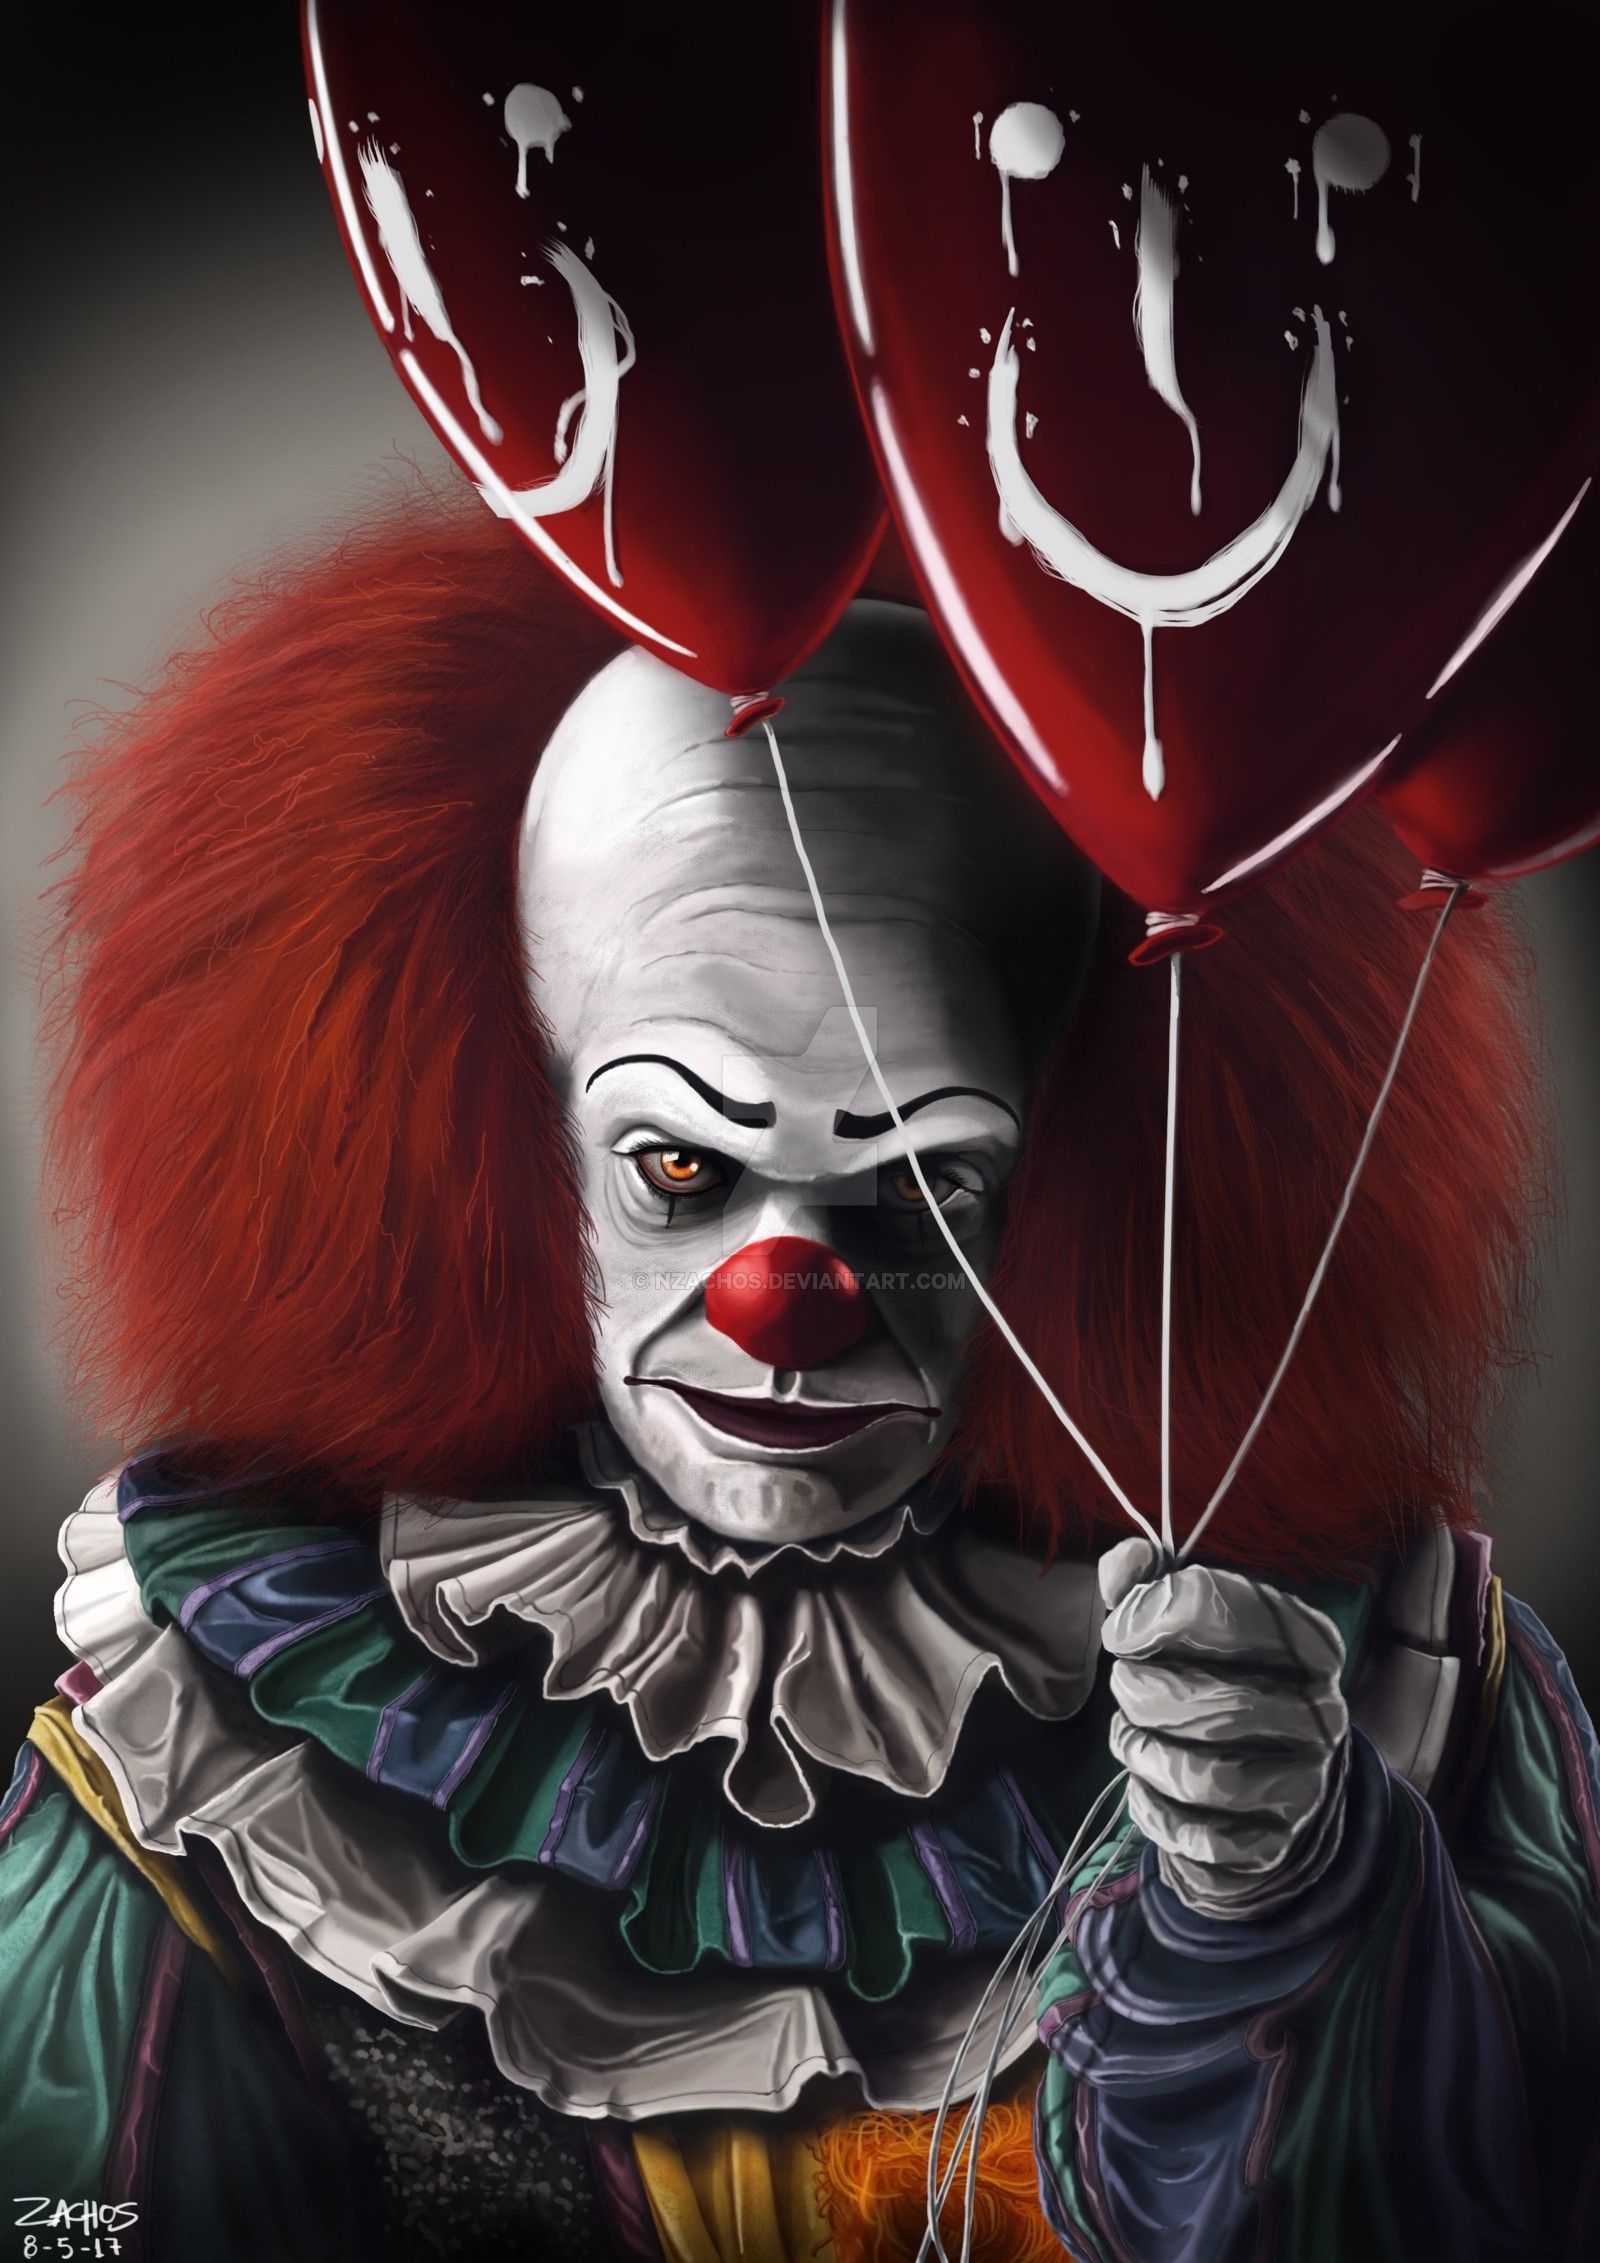 A clown holding two red balloons with smiley faces - Clown